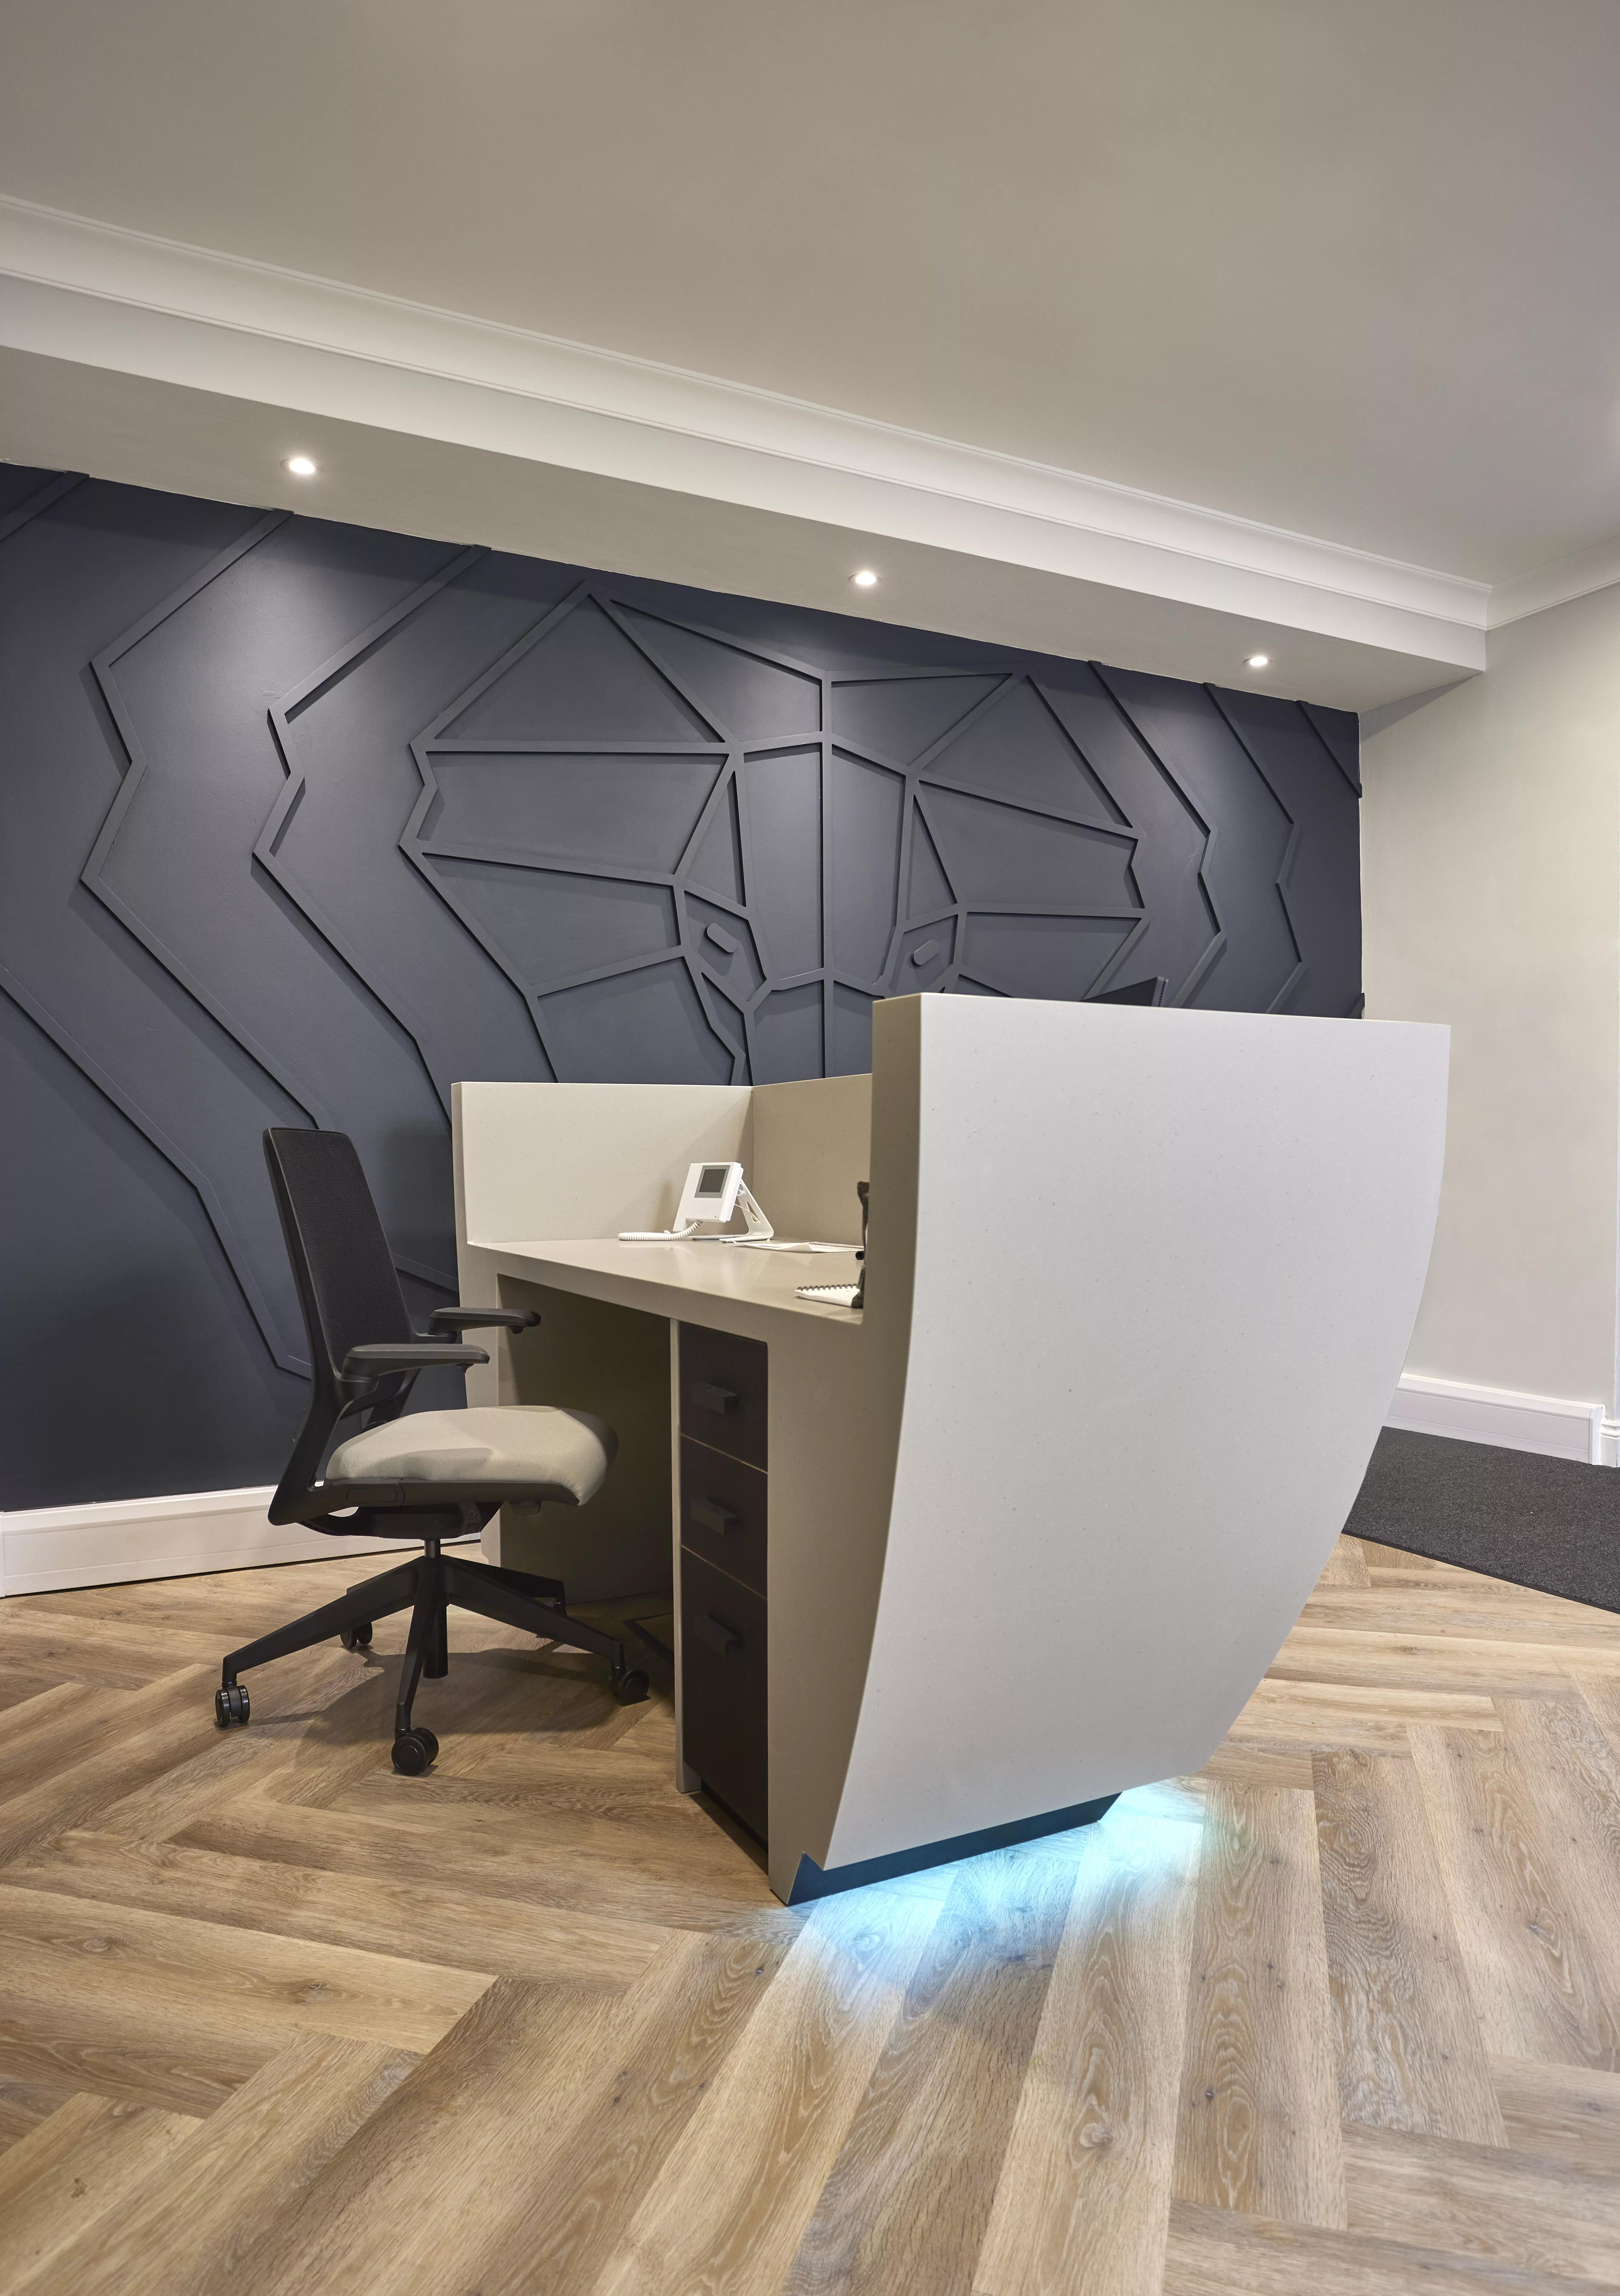 HIMACS creates a striking and sculptural reception desk at Pitalia’s new Manchester office